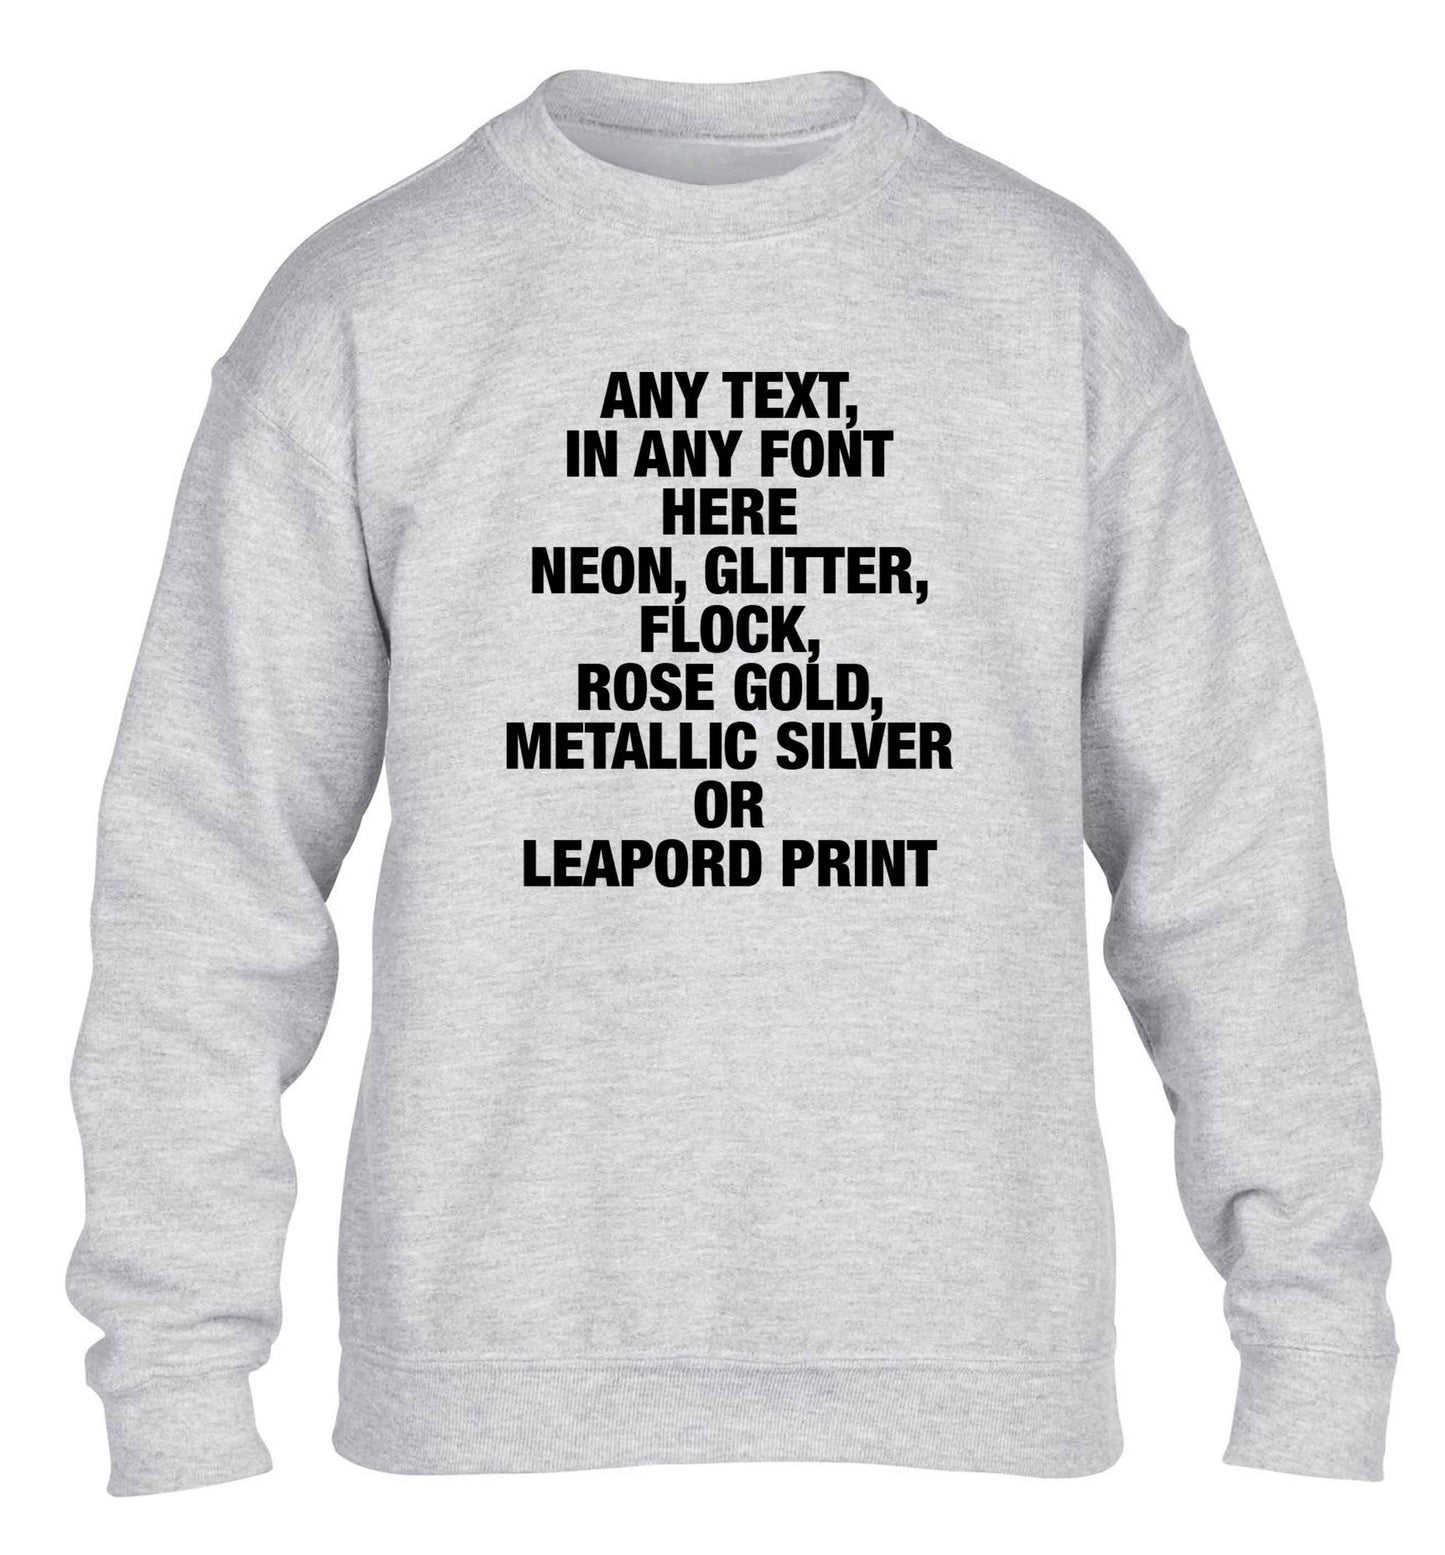 Premium custom order any text colour and font children's grey sweater 12-13 Years